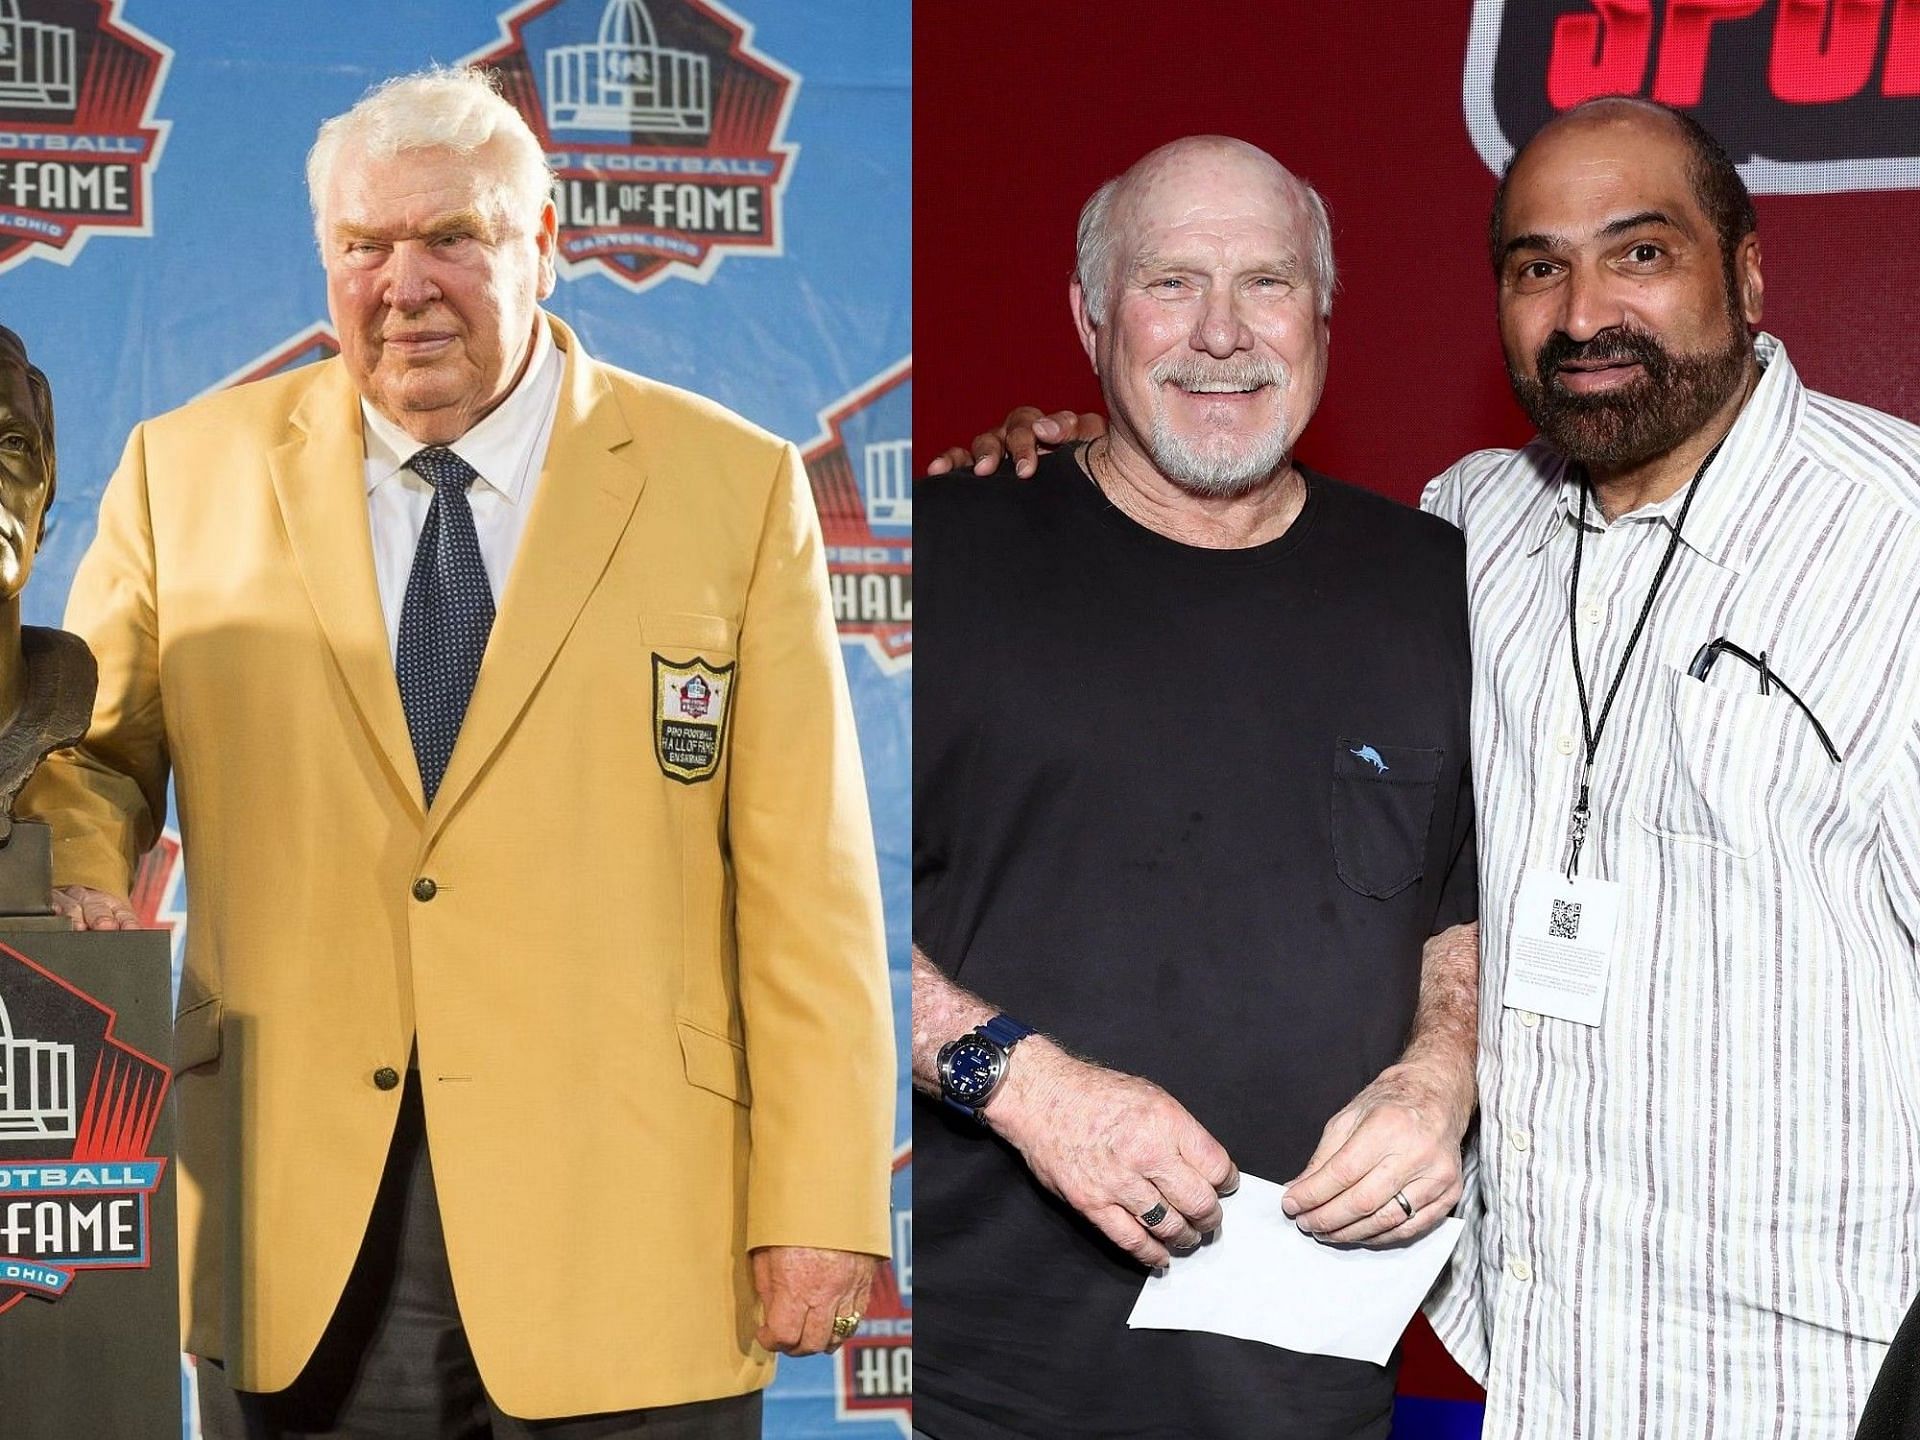 John Madden struggled to accept Immaculate Reception for the rest of his life, says Terry Bradshaw